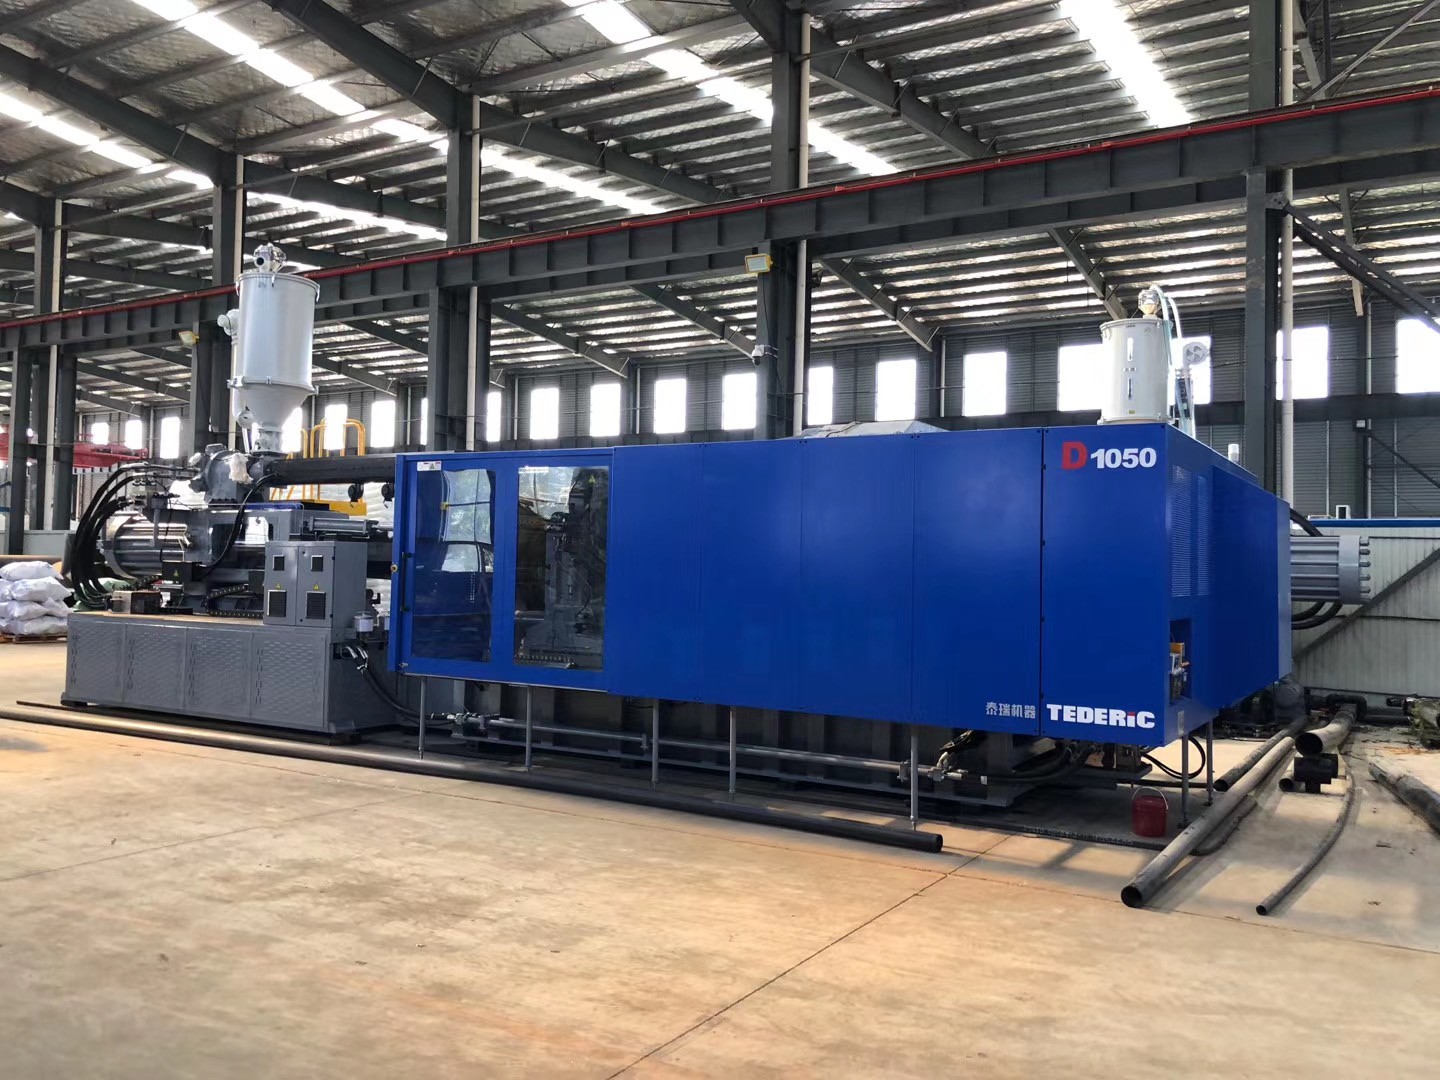 PE pipe injection molding machines arrived at Tengyuan Group's pipe fitting production